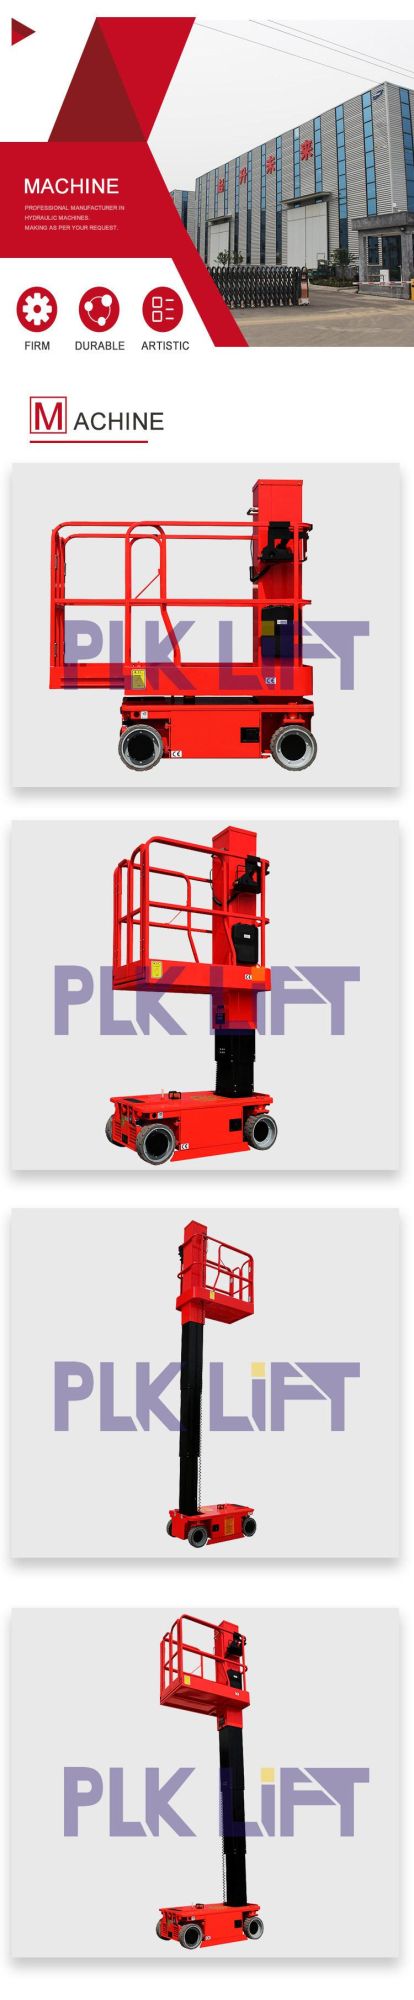 Compact Indoor Vertical One Man Ladder Lift 4m 5m Telescopic for Warehouse